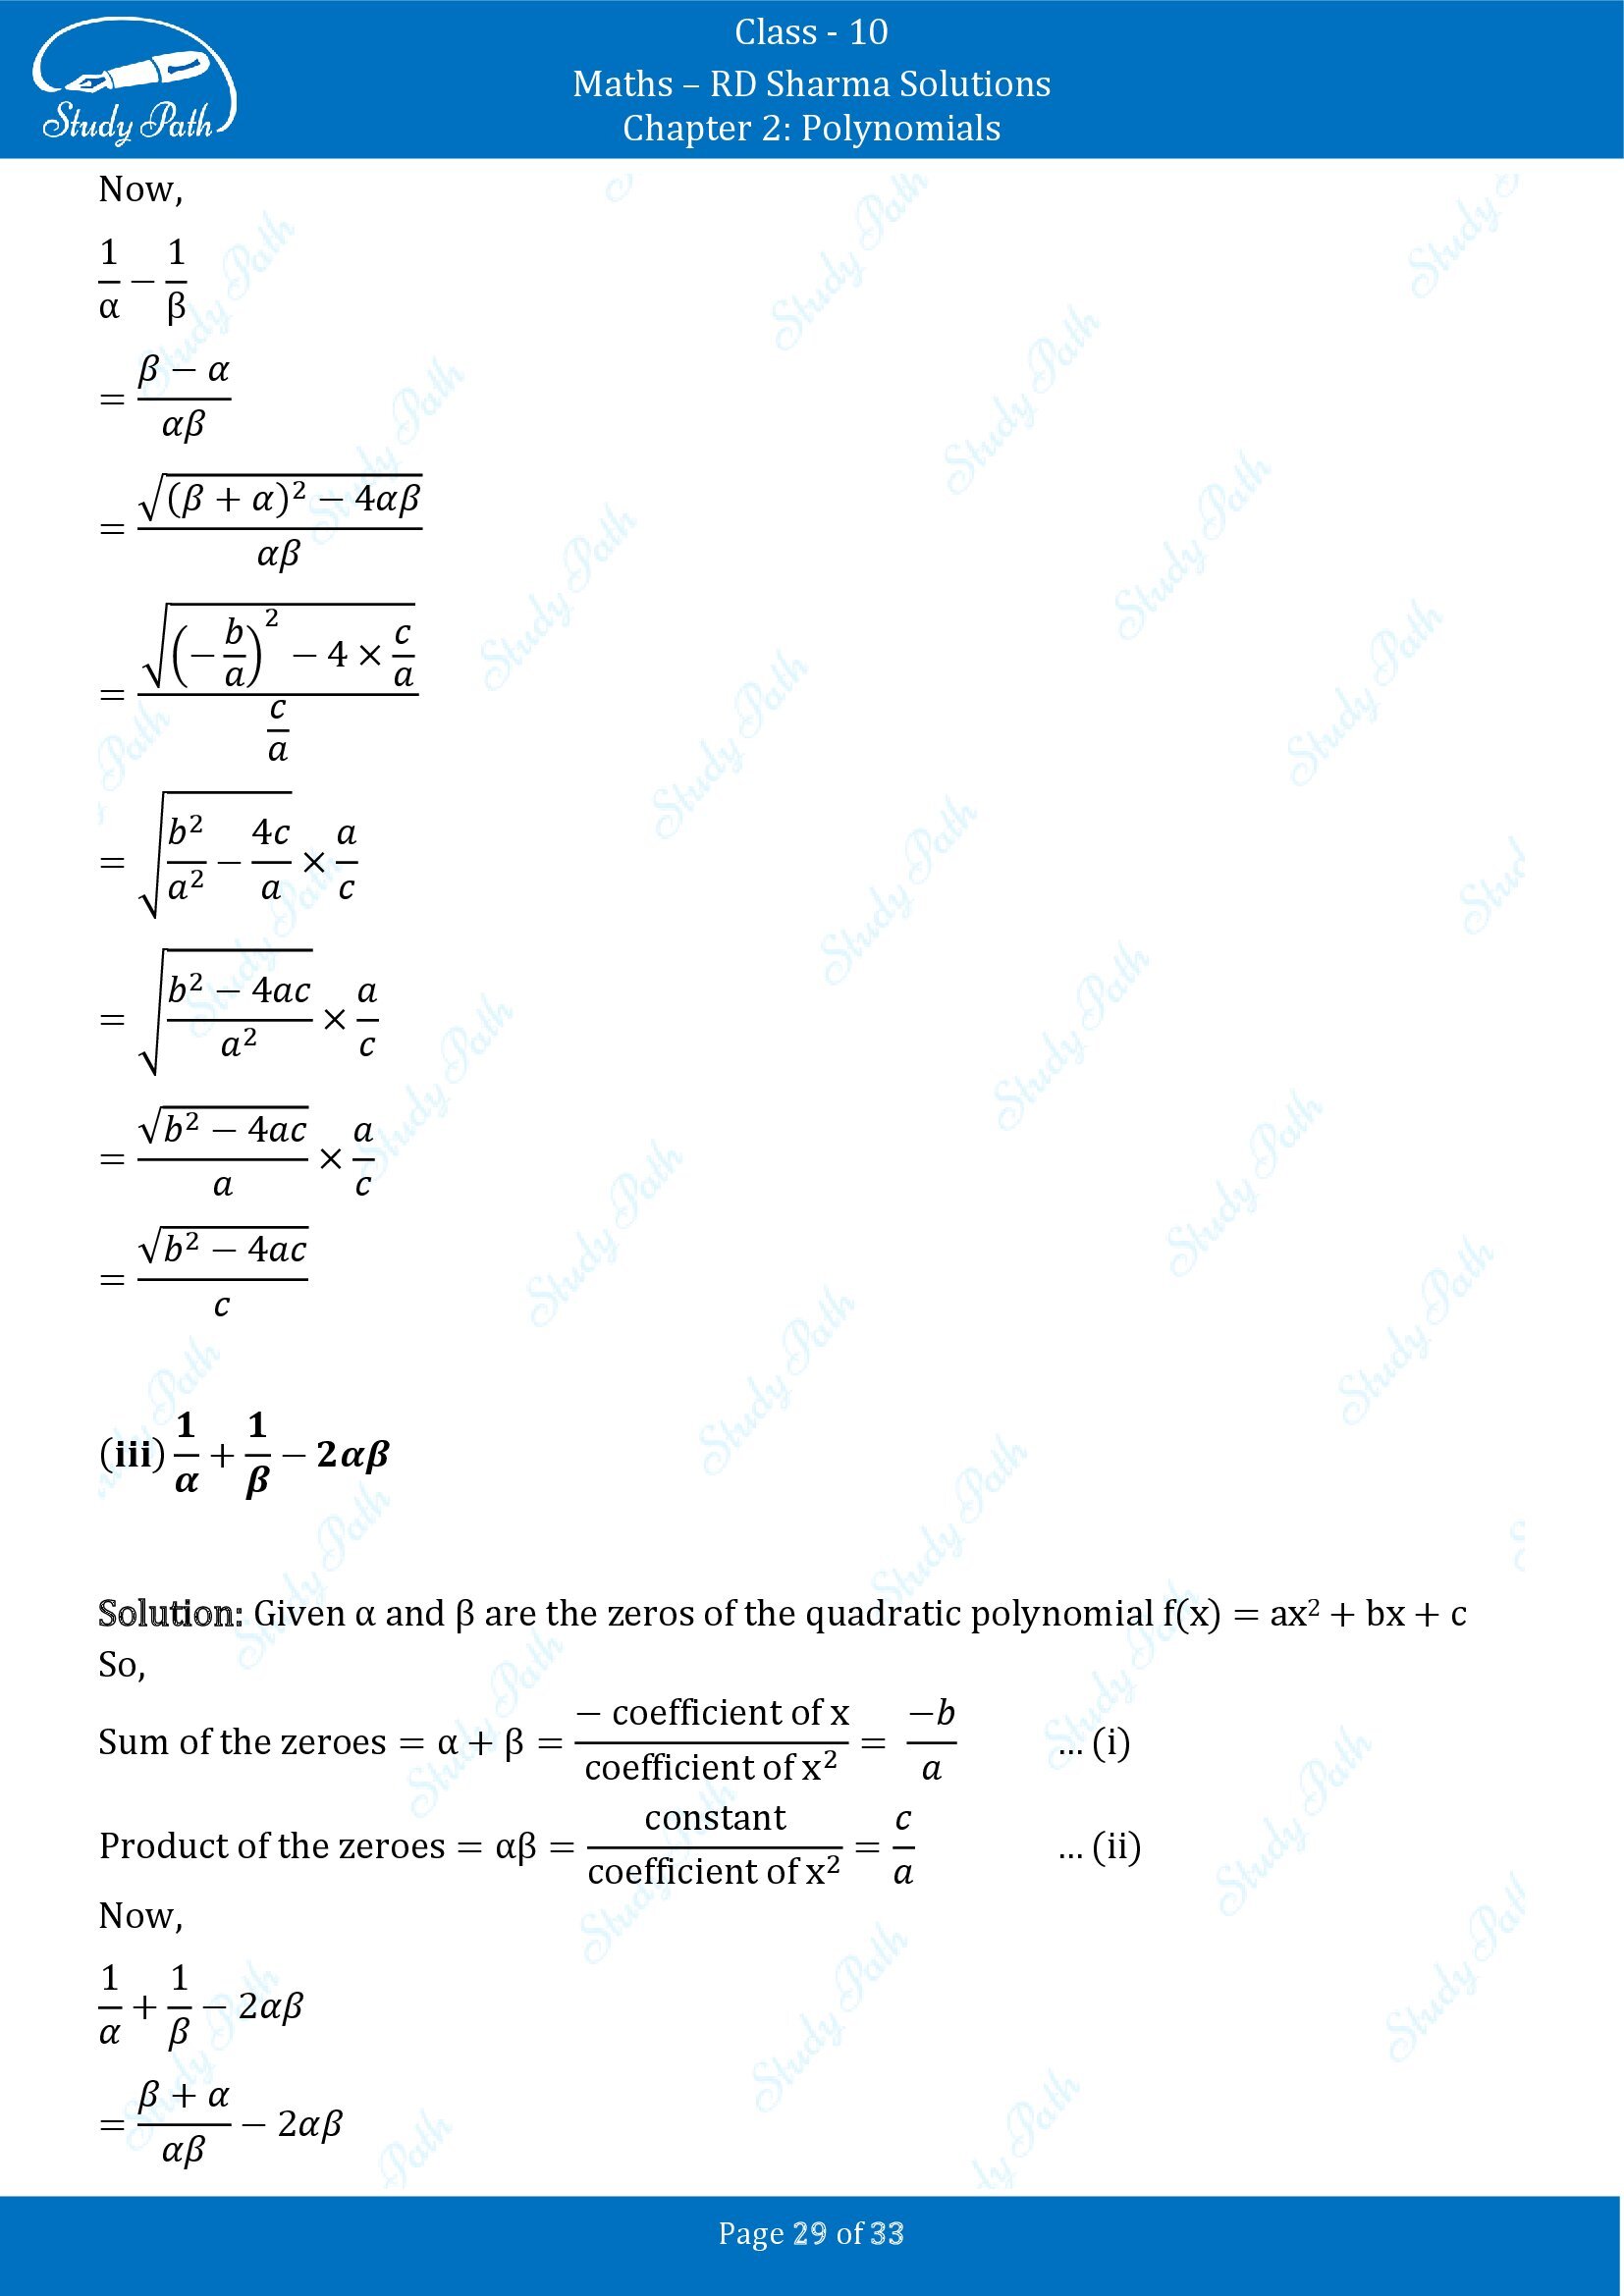 RD Sharma Solutions Class 10 Chapter 2 Polynomials Exercise 2.1 00029